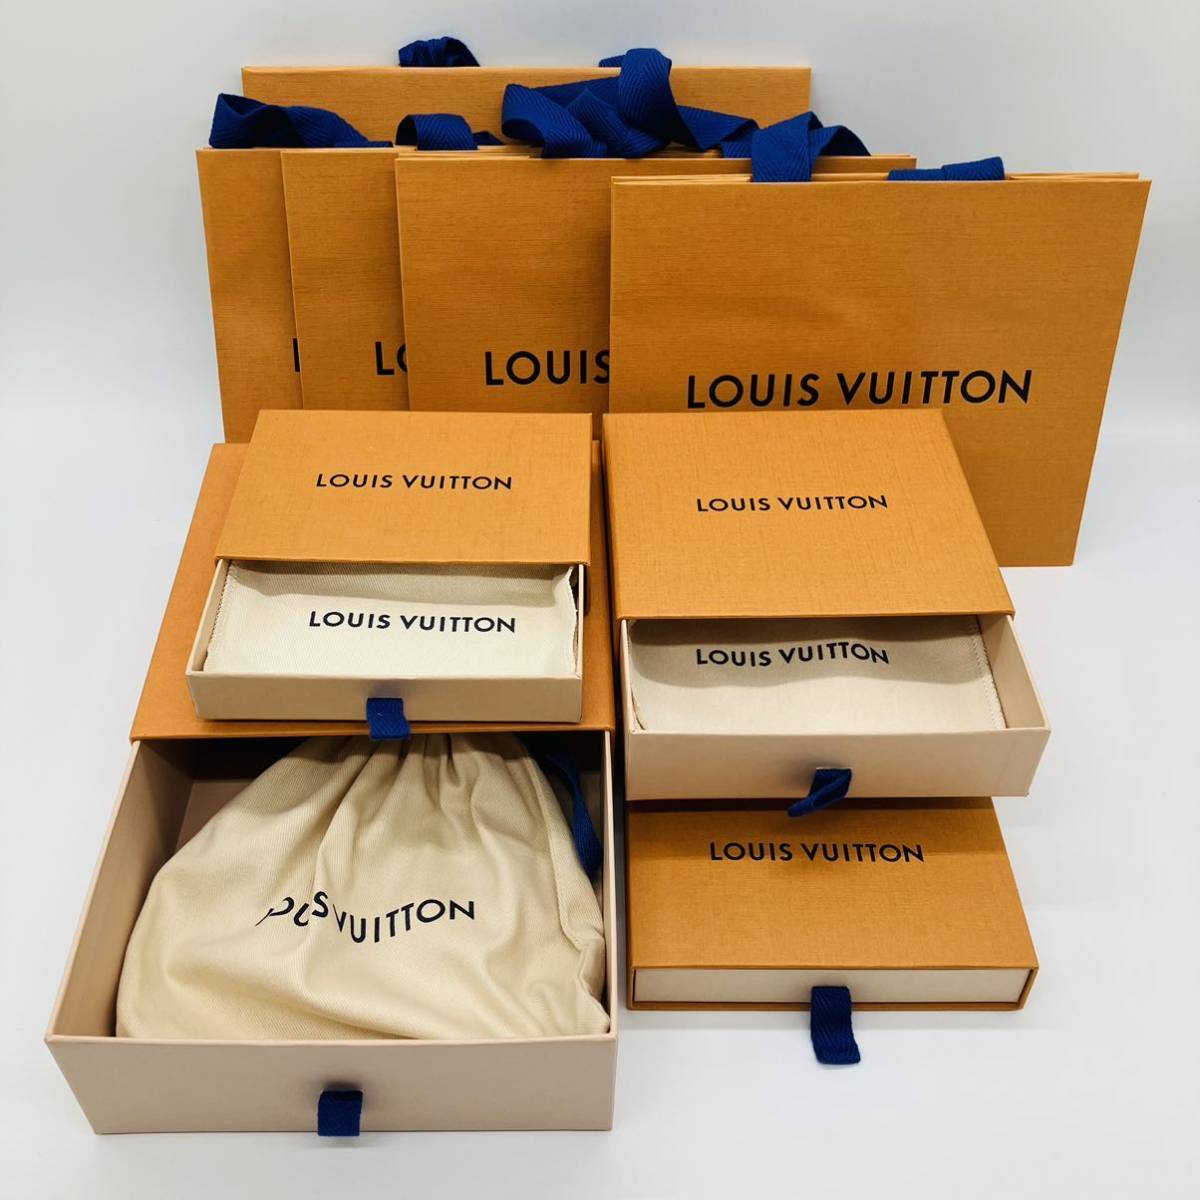 LOUIS VUITTONルイヴィトン 空箱22個 紙袋 その他 まとめ売り-